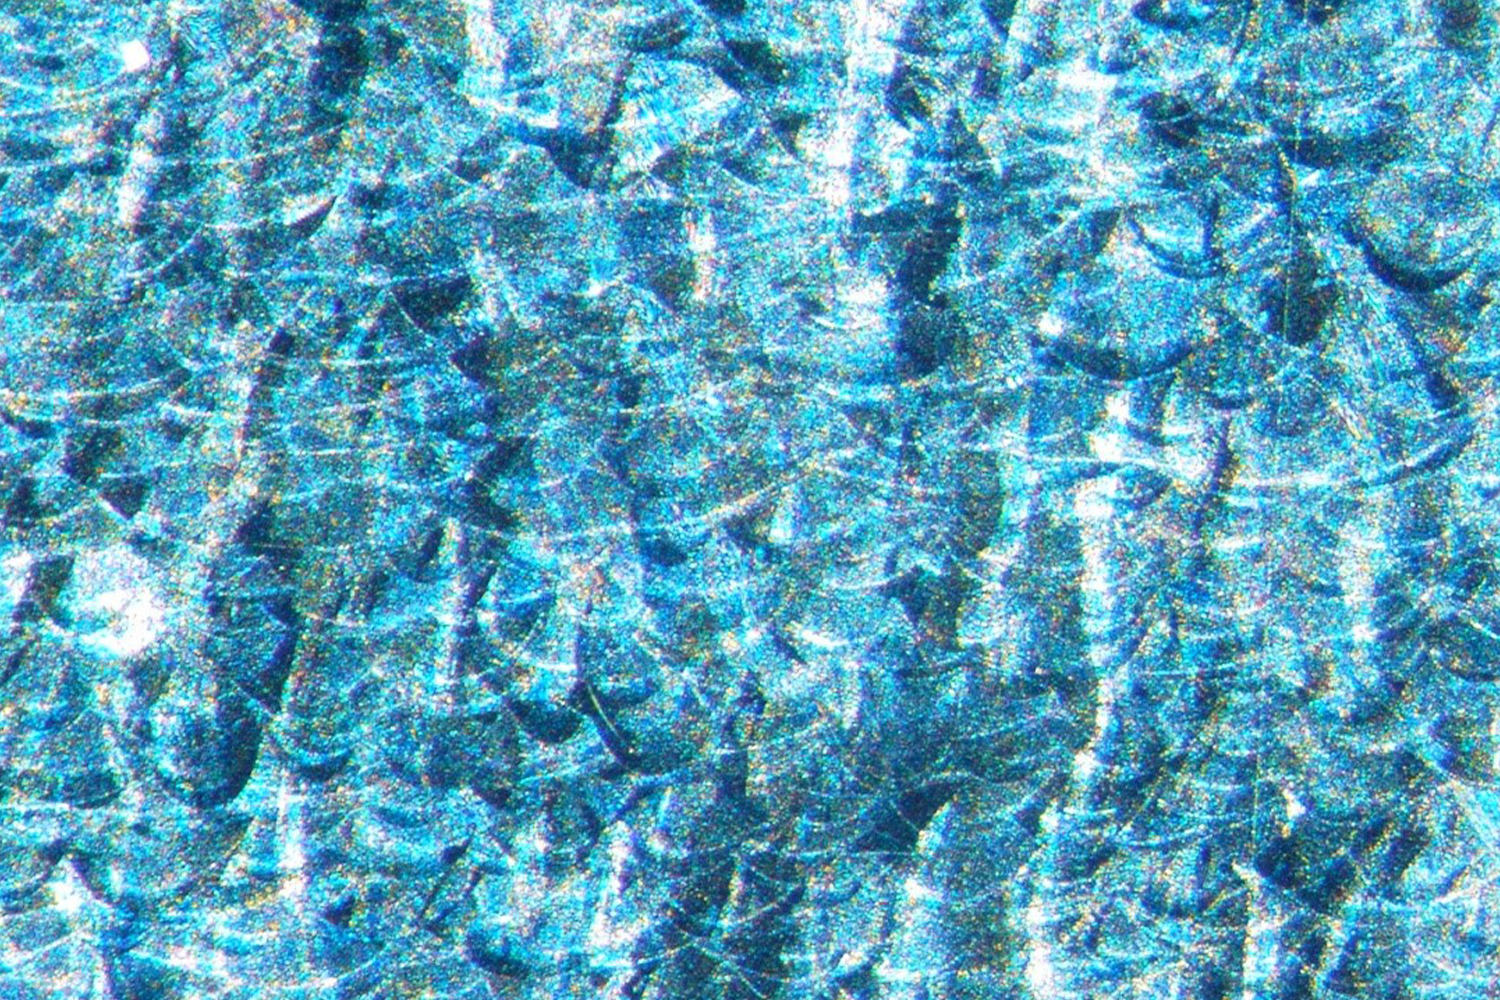 Blue material under microscope